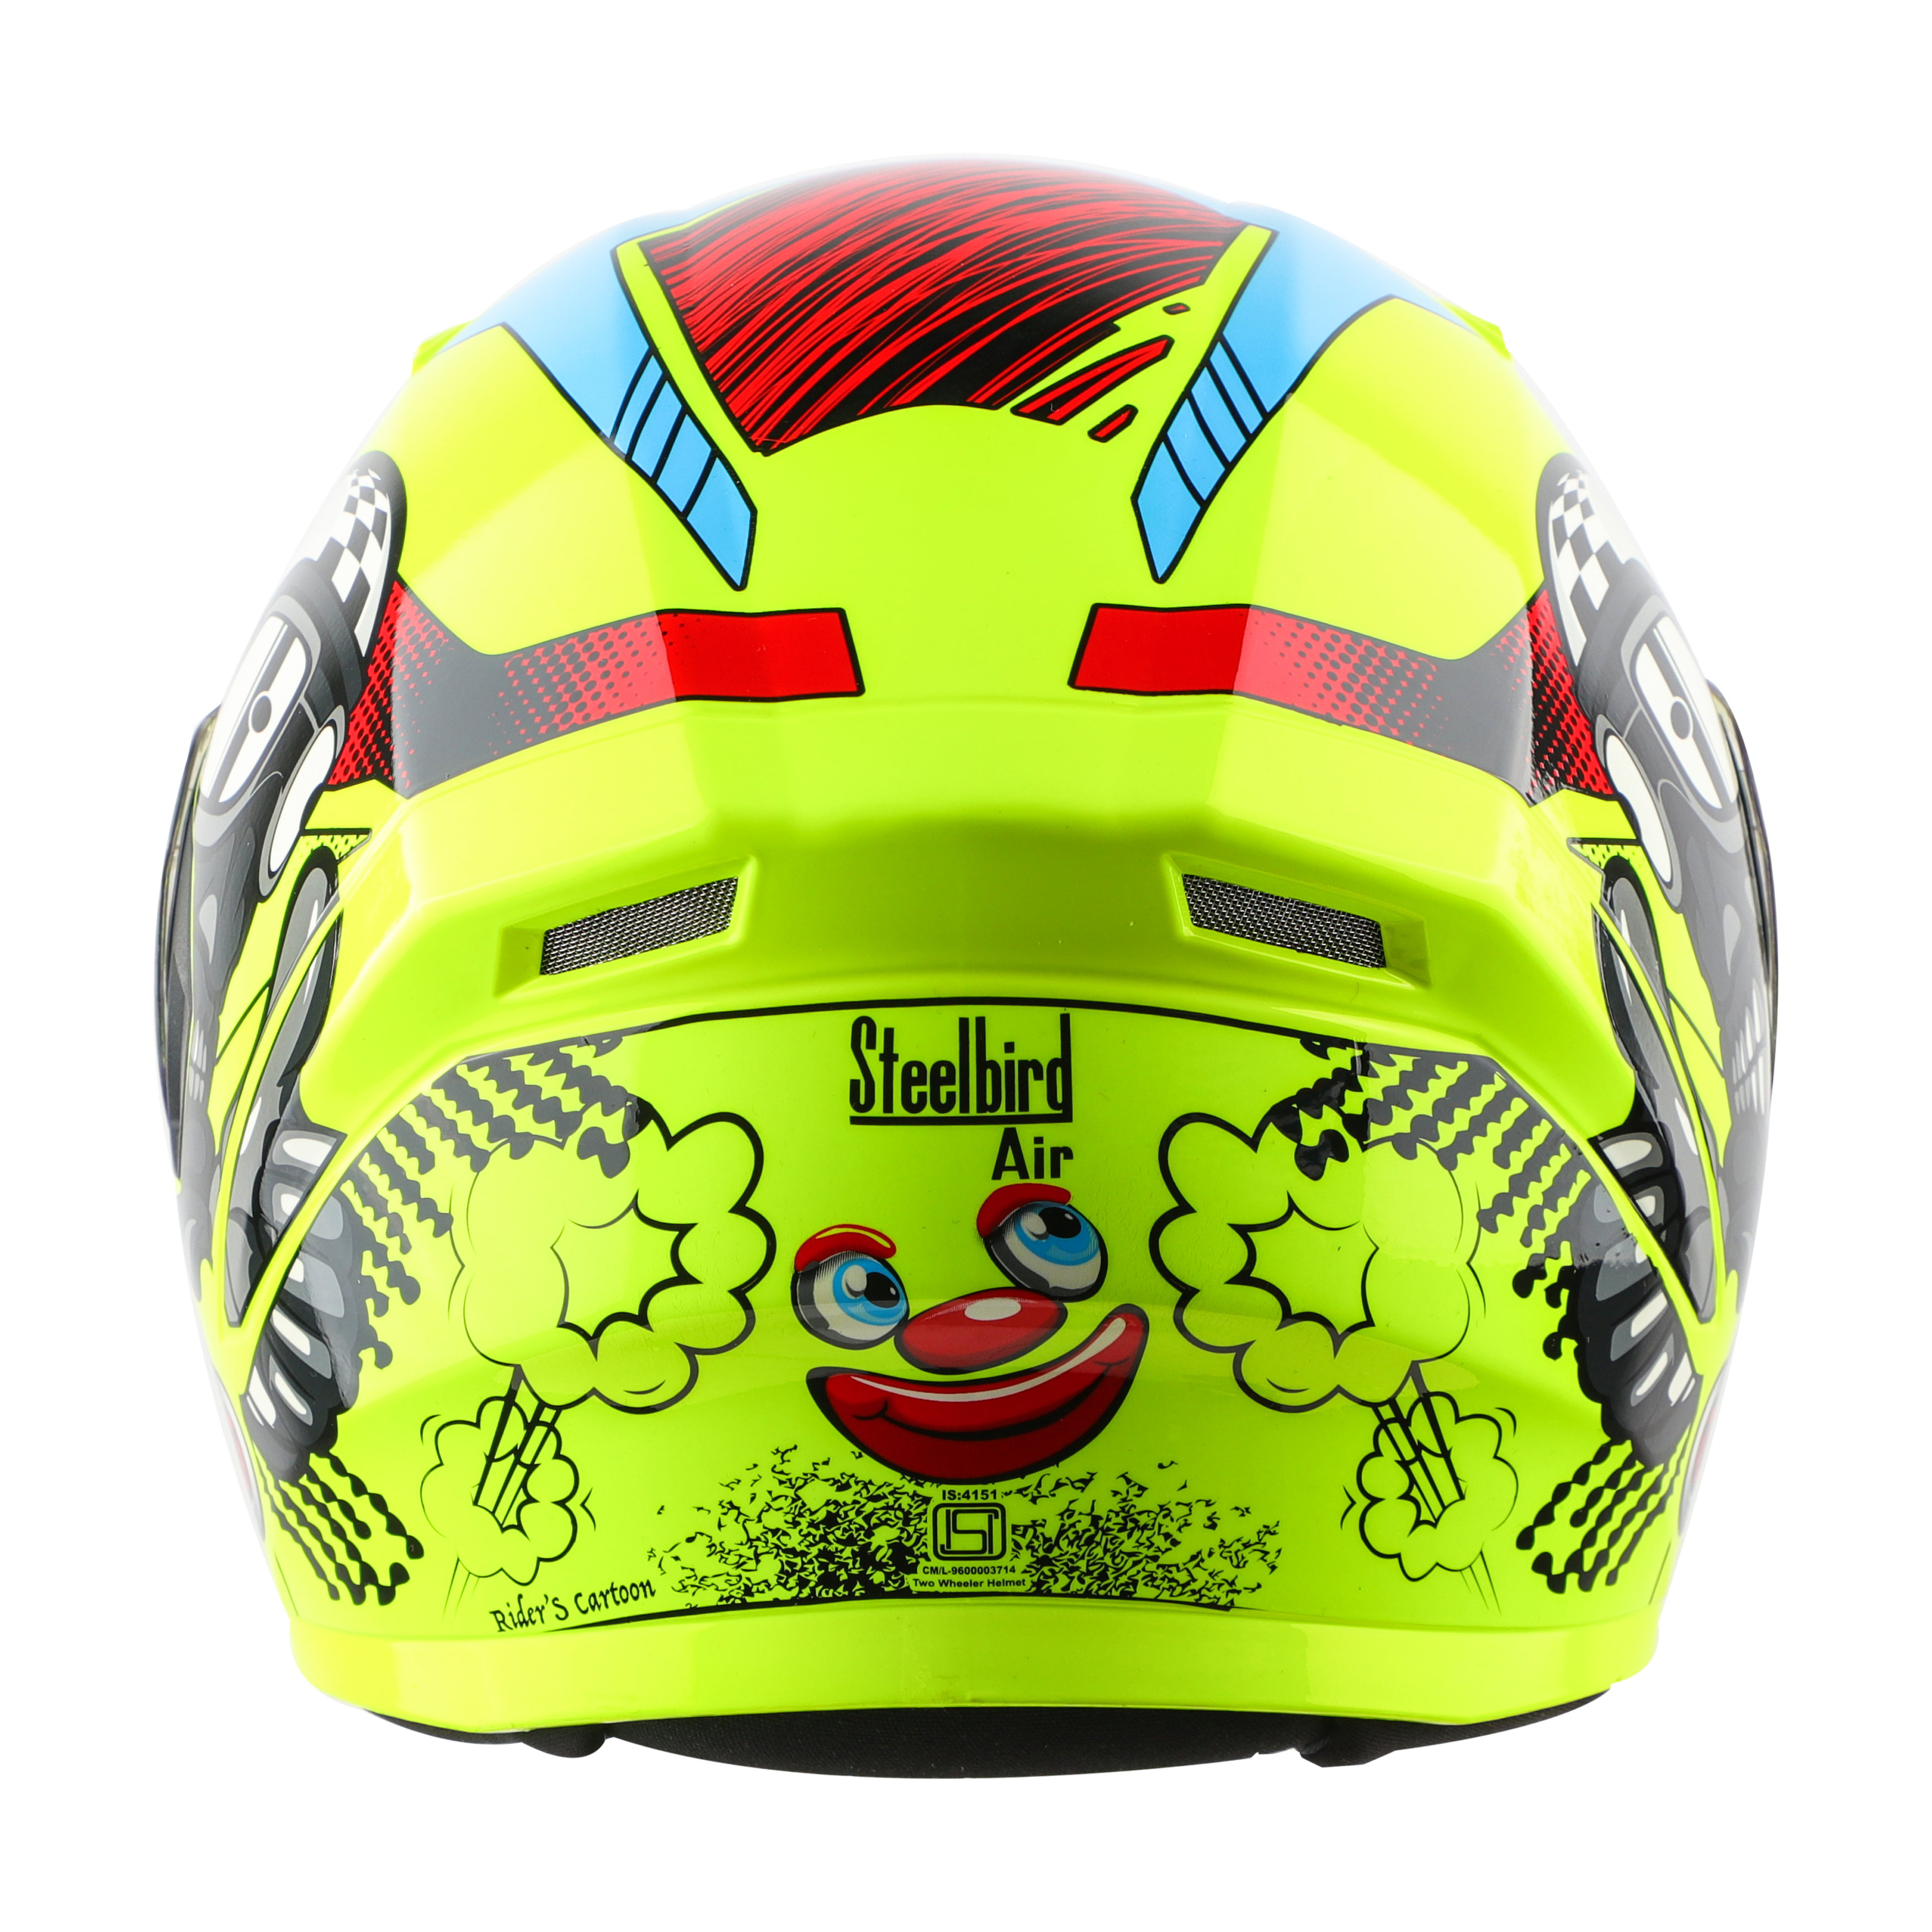 SBA-21 COMIC PREMIUM GLOSSY FLUO NEON WITH NEON (WITH CHROME SILVER INNER SUNSHIELD, WITH HIGH-END INTERIOR)